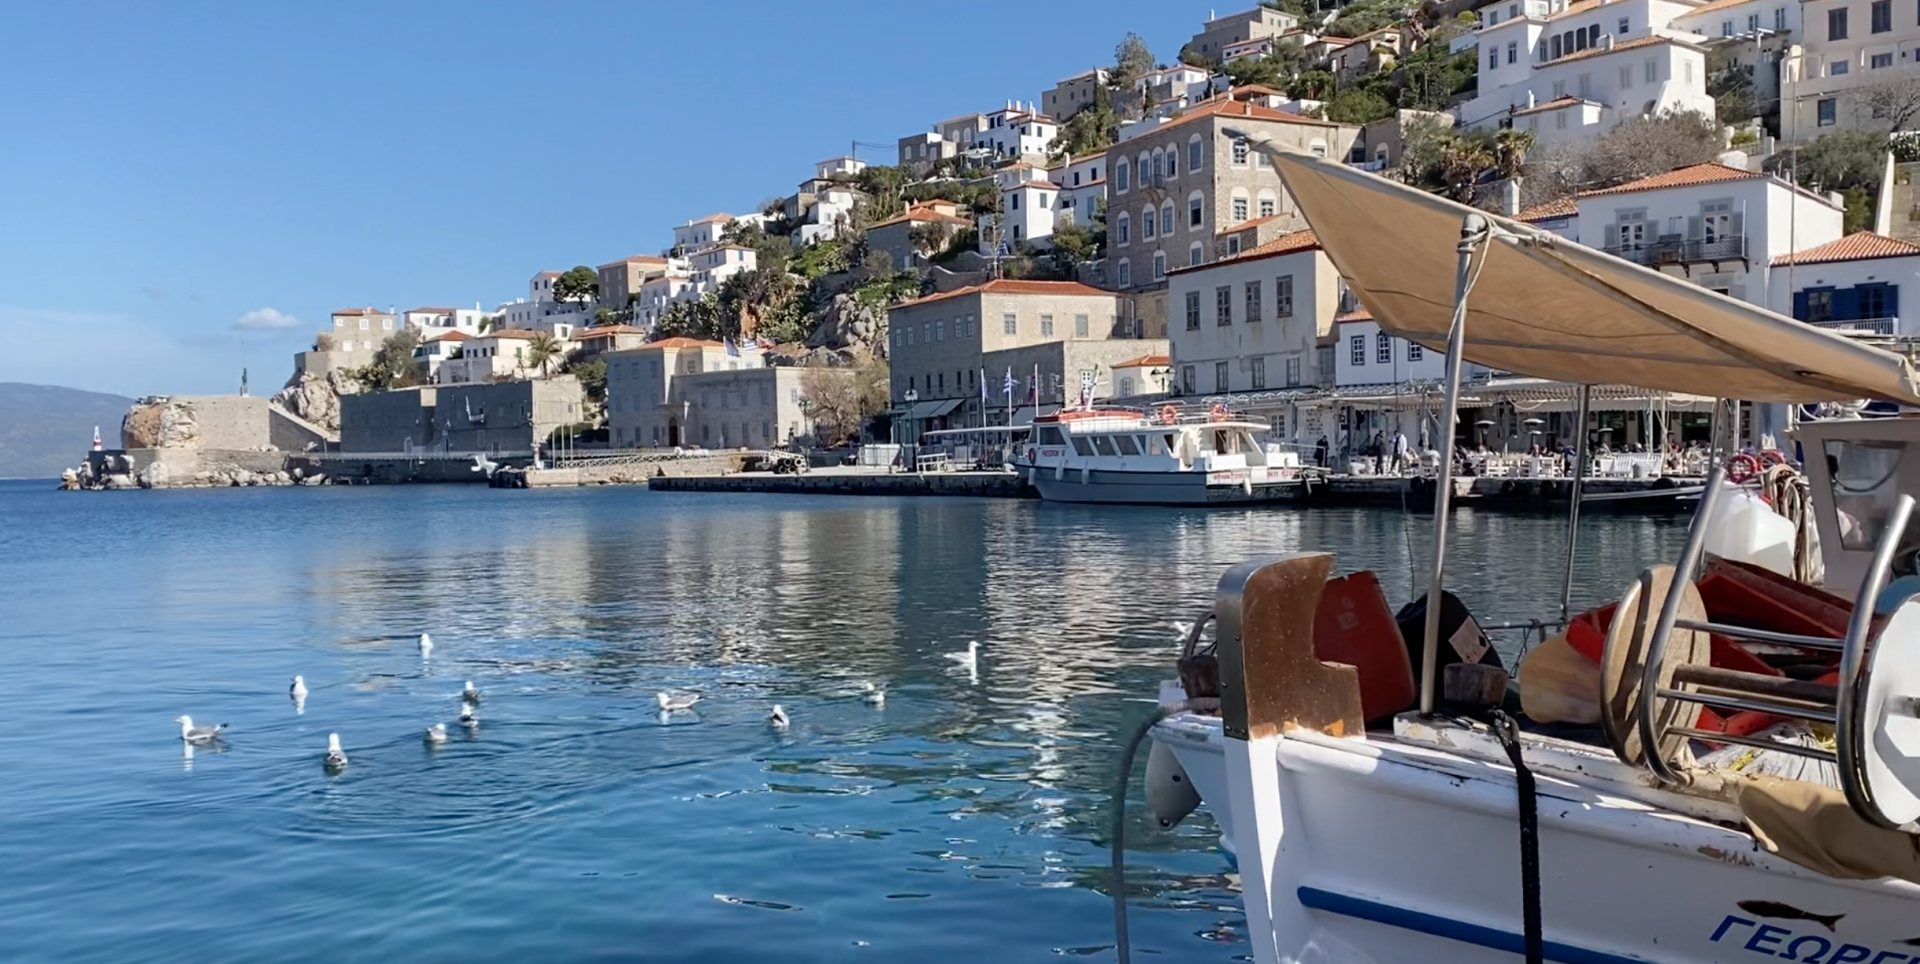 Hydra harbour in February 2022